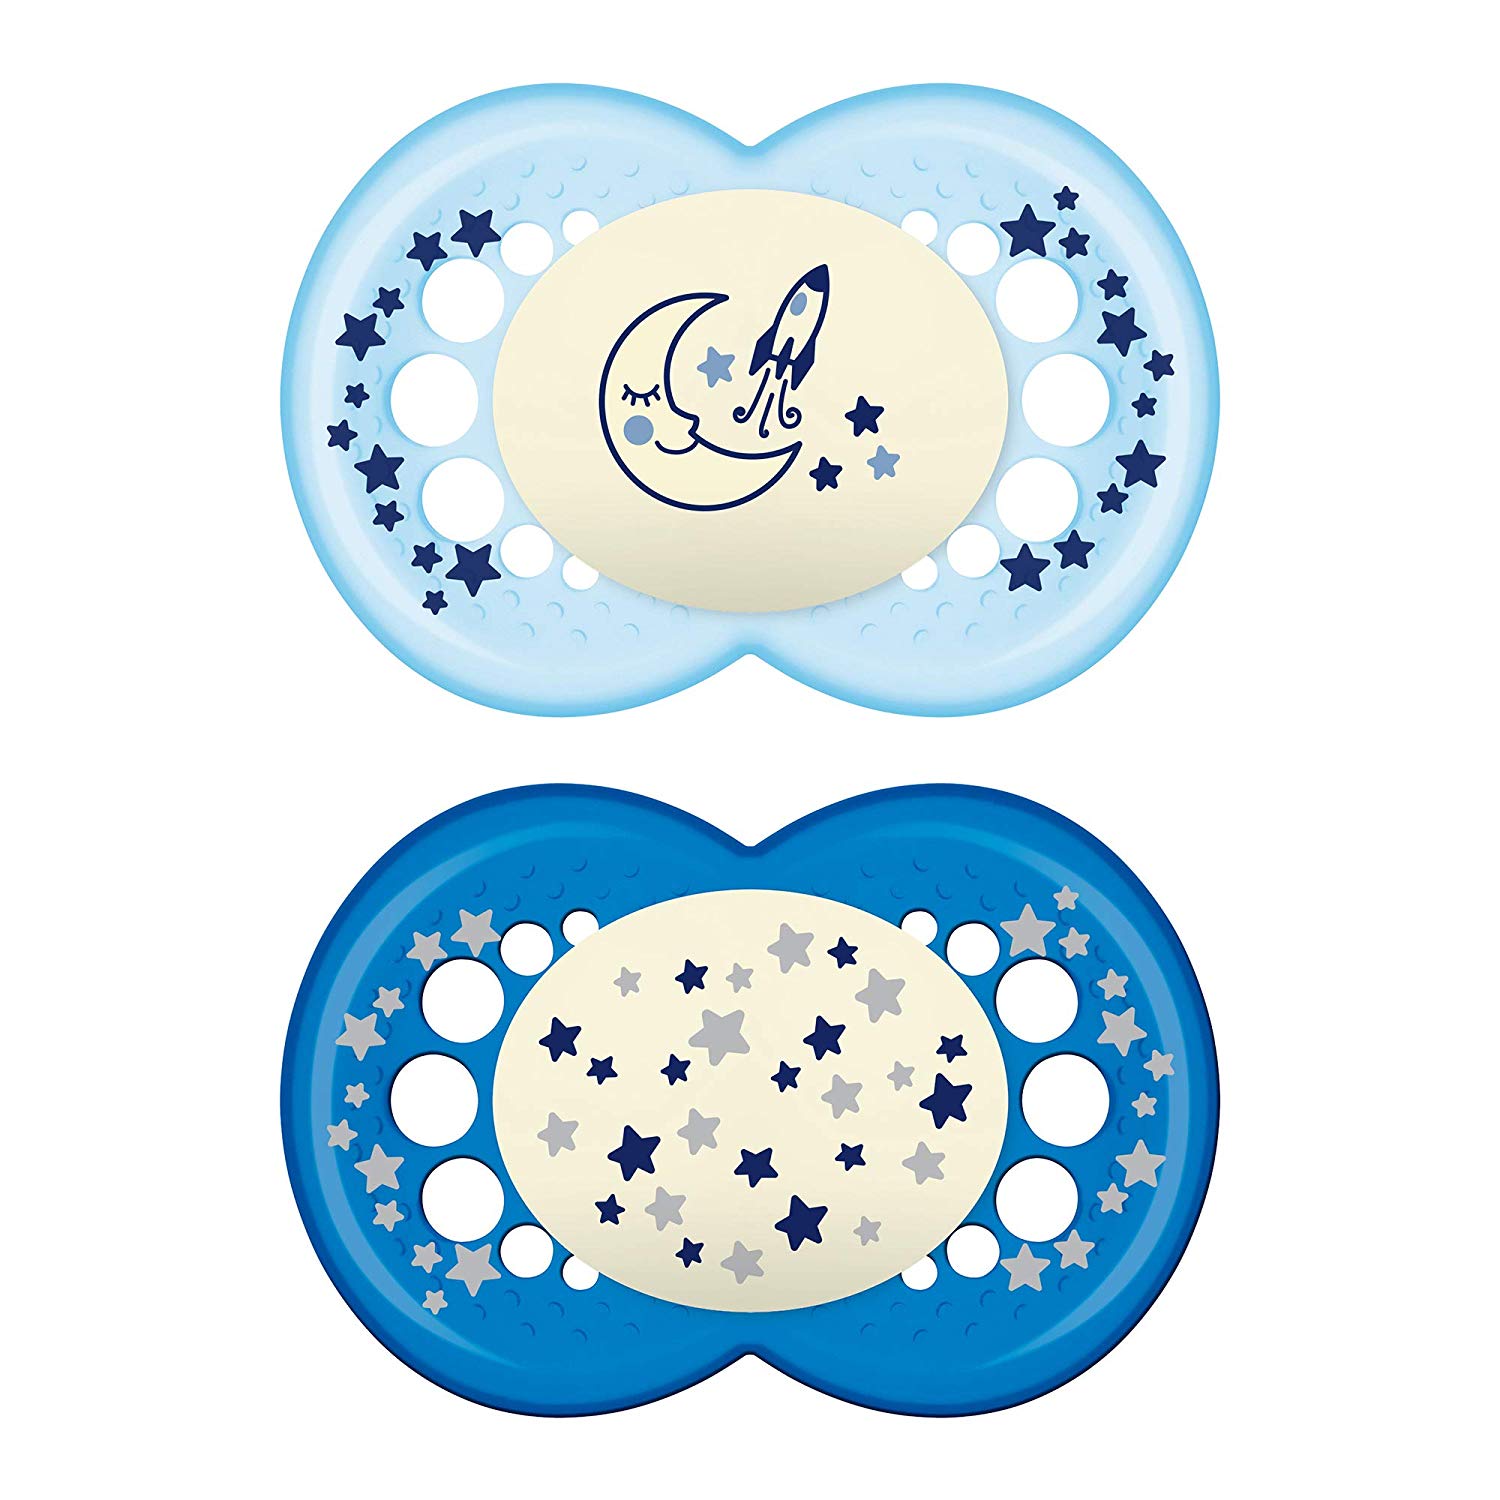 Mam glow in the. Pacifier clipart paci